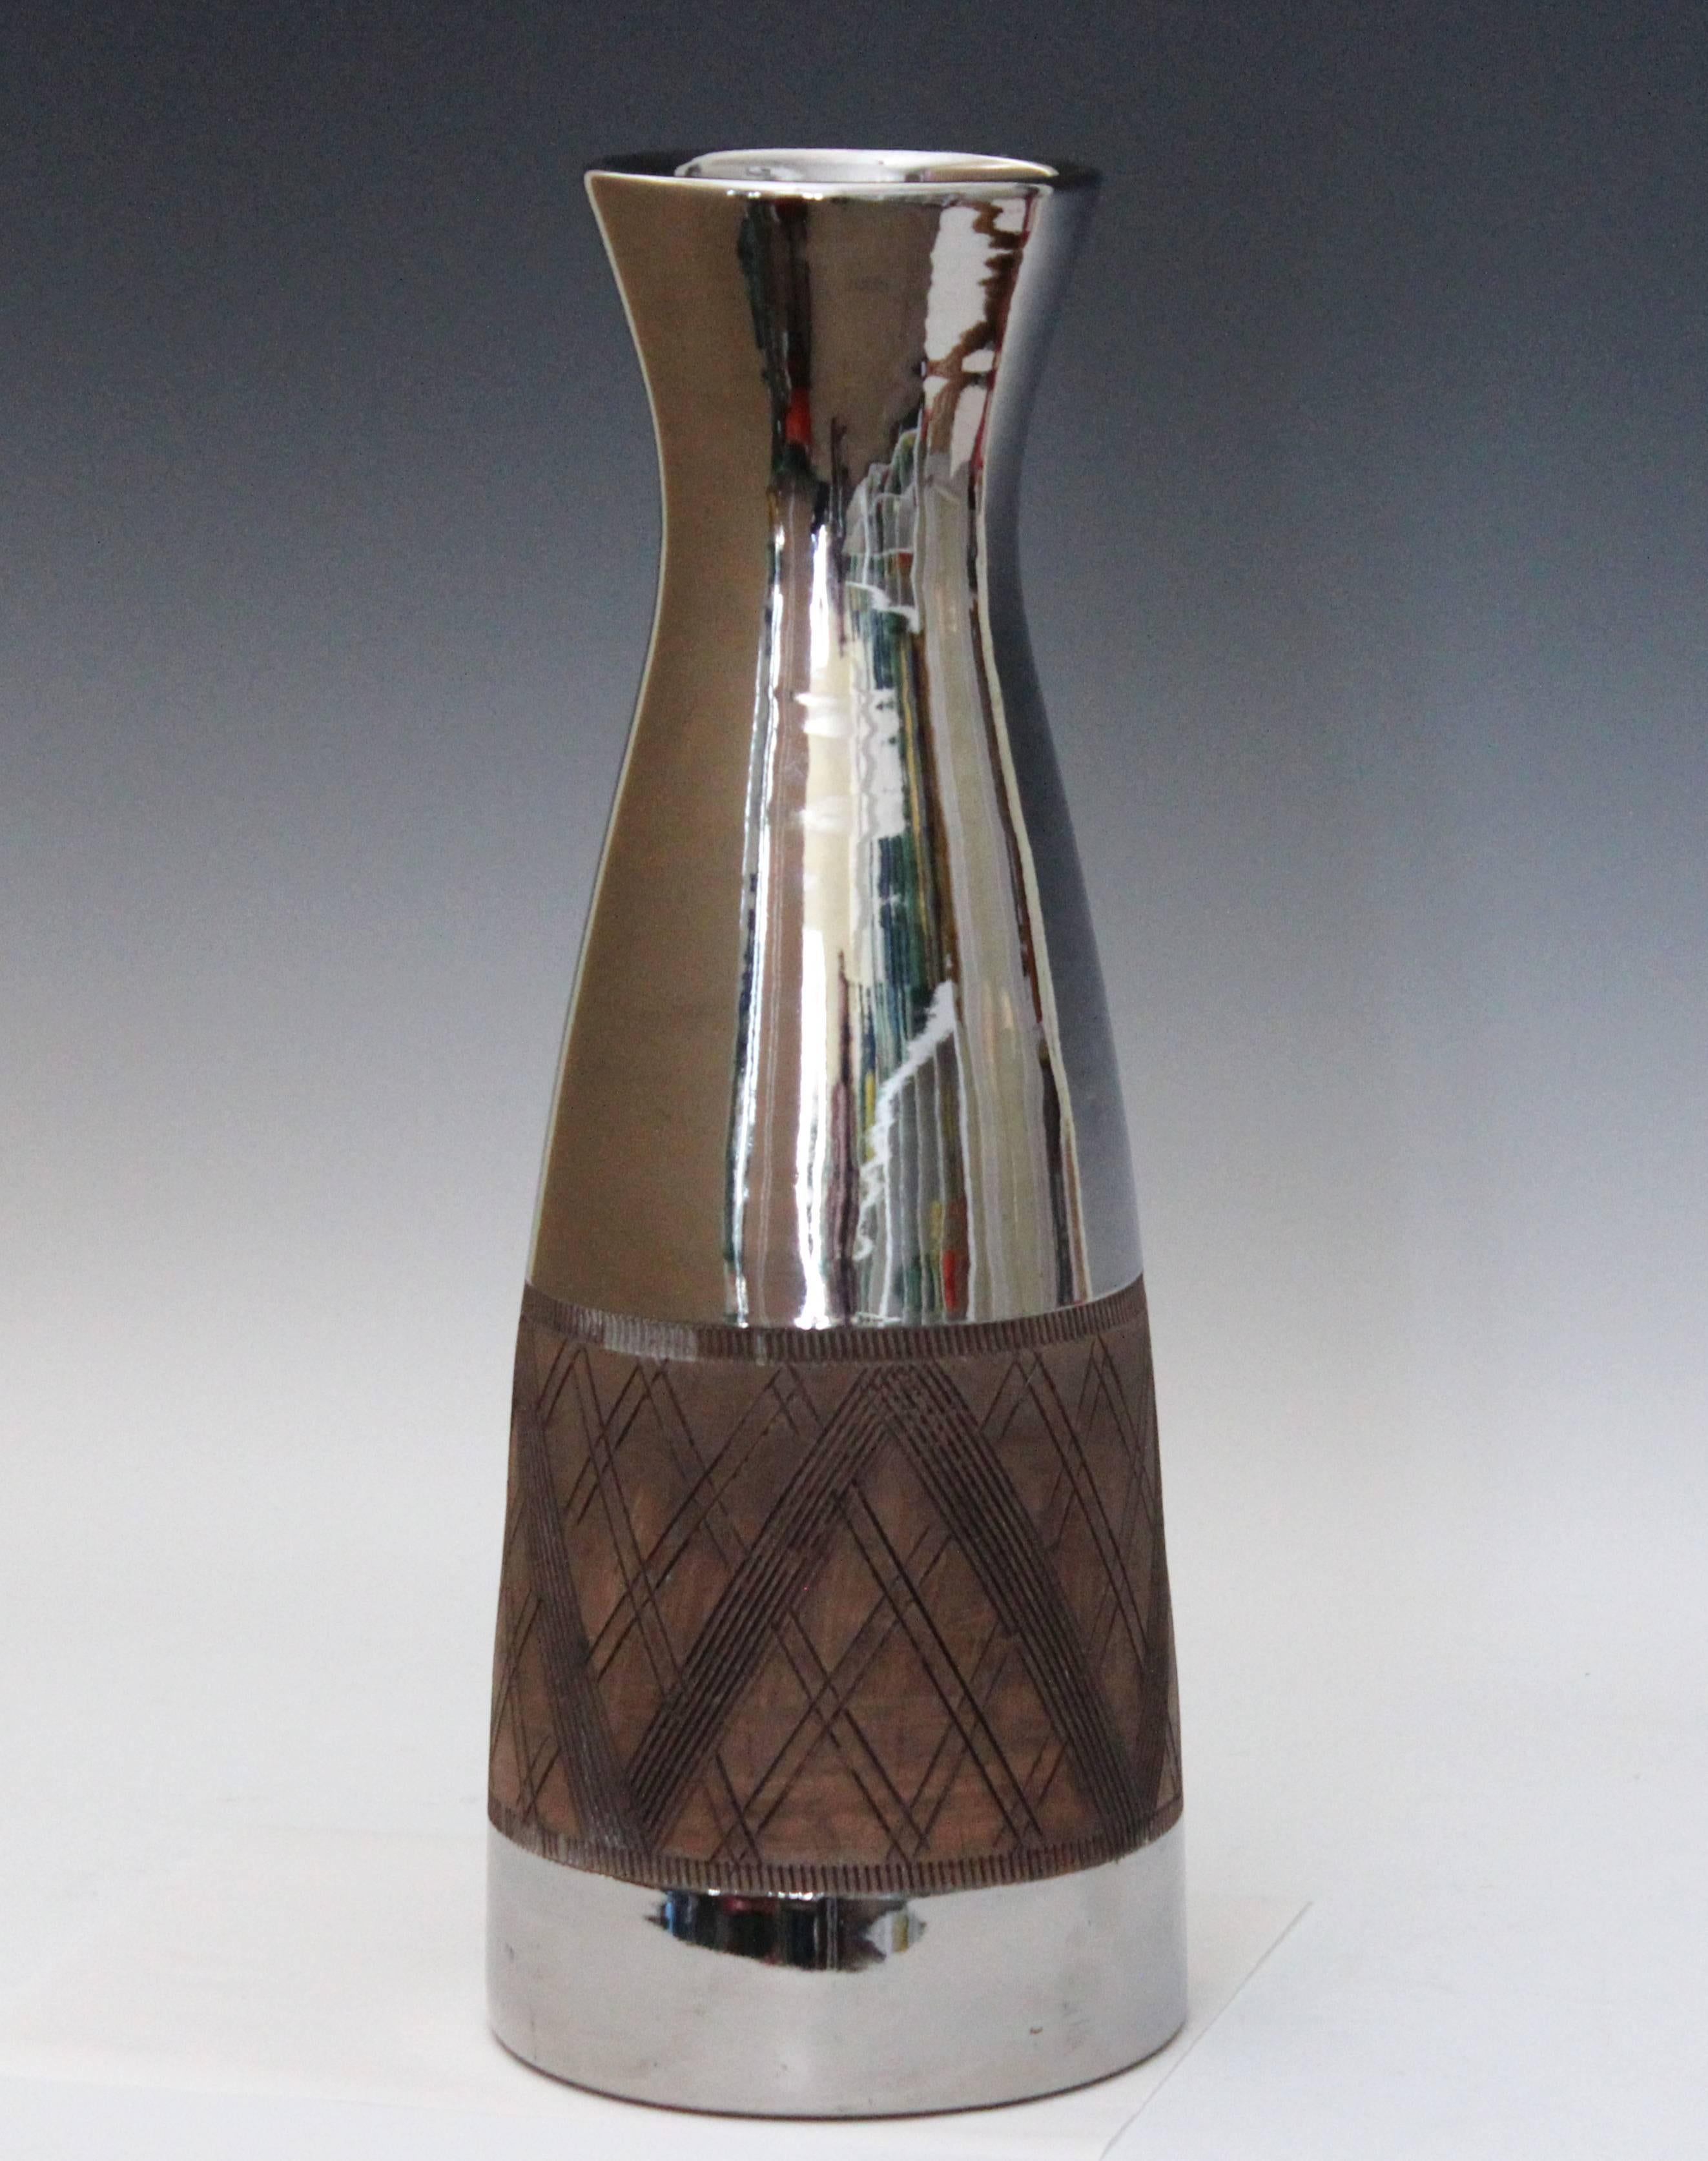 Big, sleek Bitossi pottery vase in lustrous platinum glaze, circa late 1950s-early 1960s. Hand turned with red clay and with incised cross hatching between gear tooth bands. Bitossi inventory label on base. Measures: 17" high, 6 1/2"